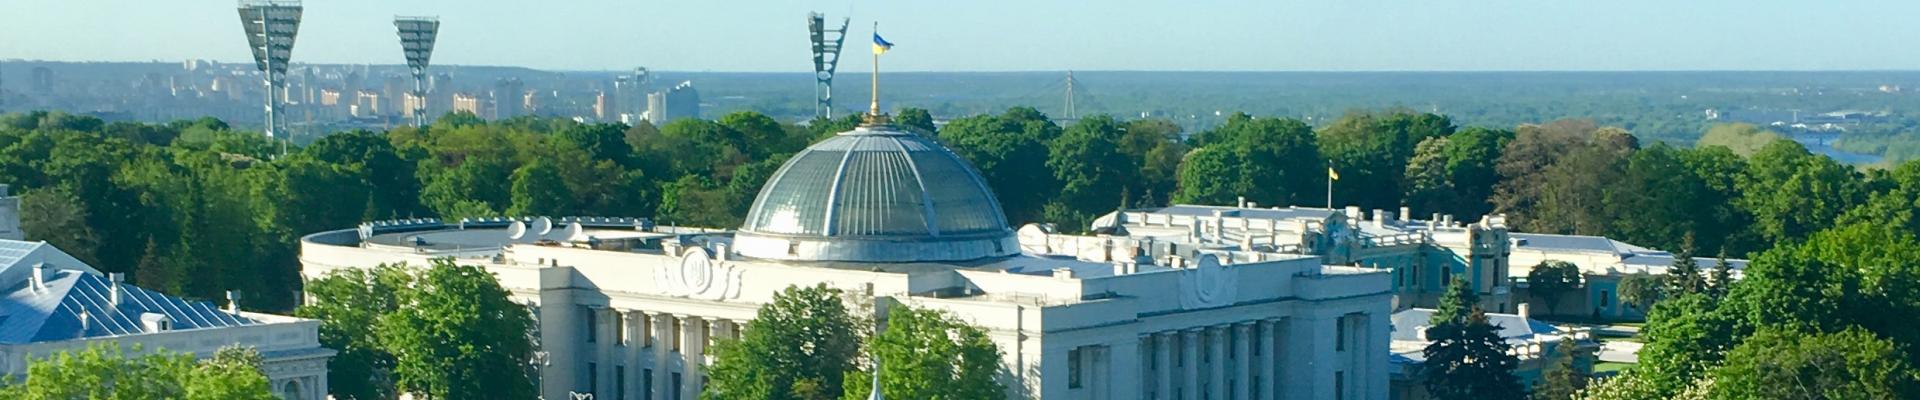 The Verkhovna Rada of Ukraine with the Ukrainian flag flying above the dome on a sunny day